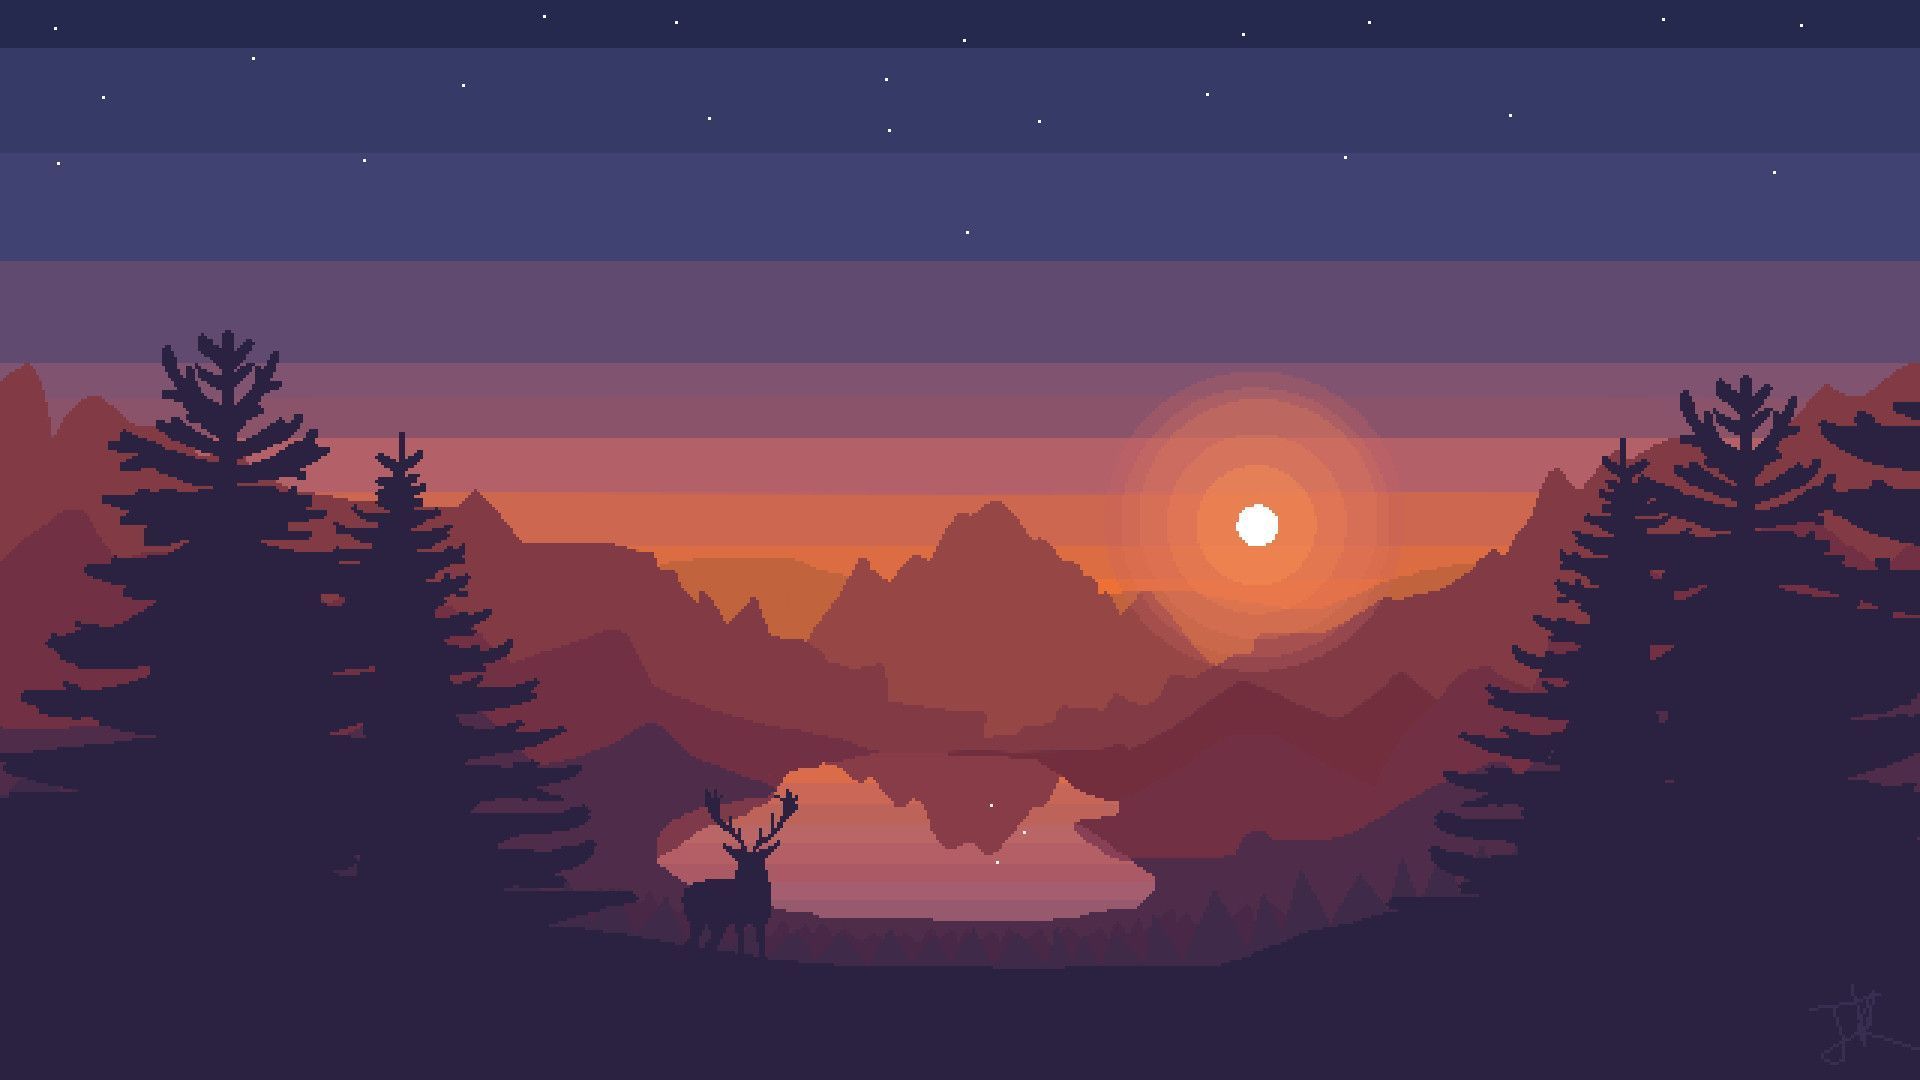 A sunset scene with mountains and trees - Pixel art